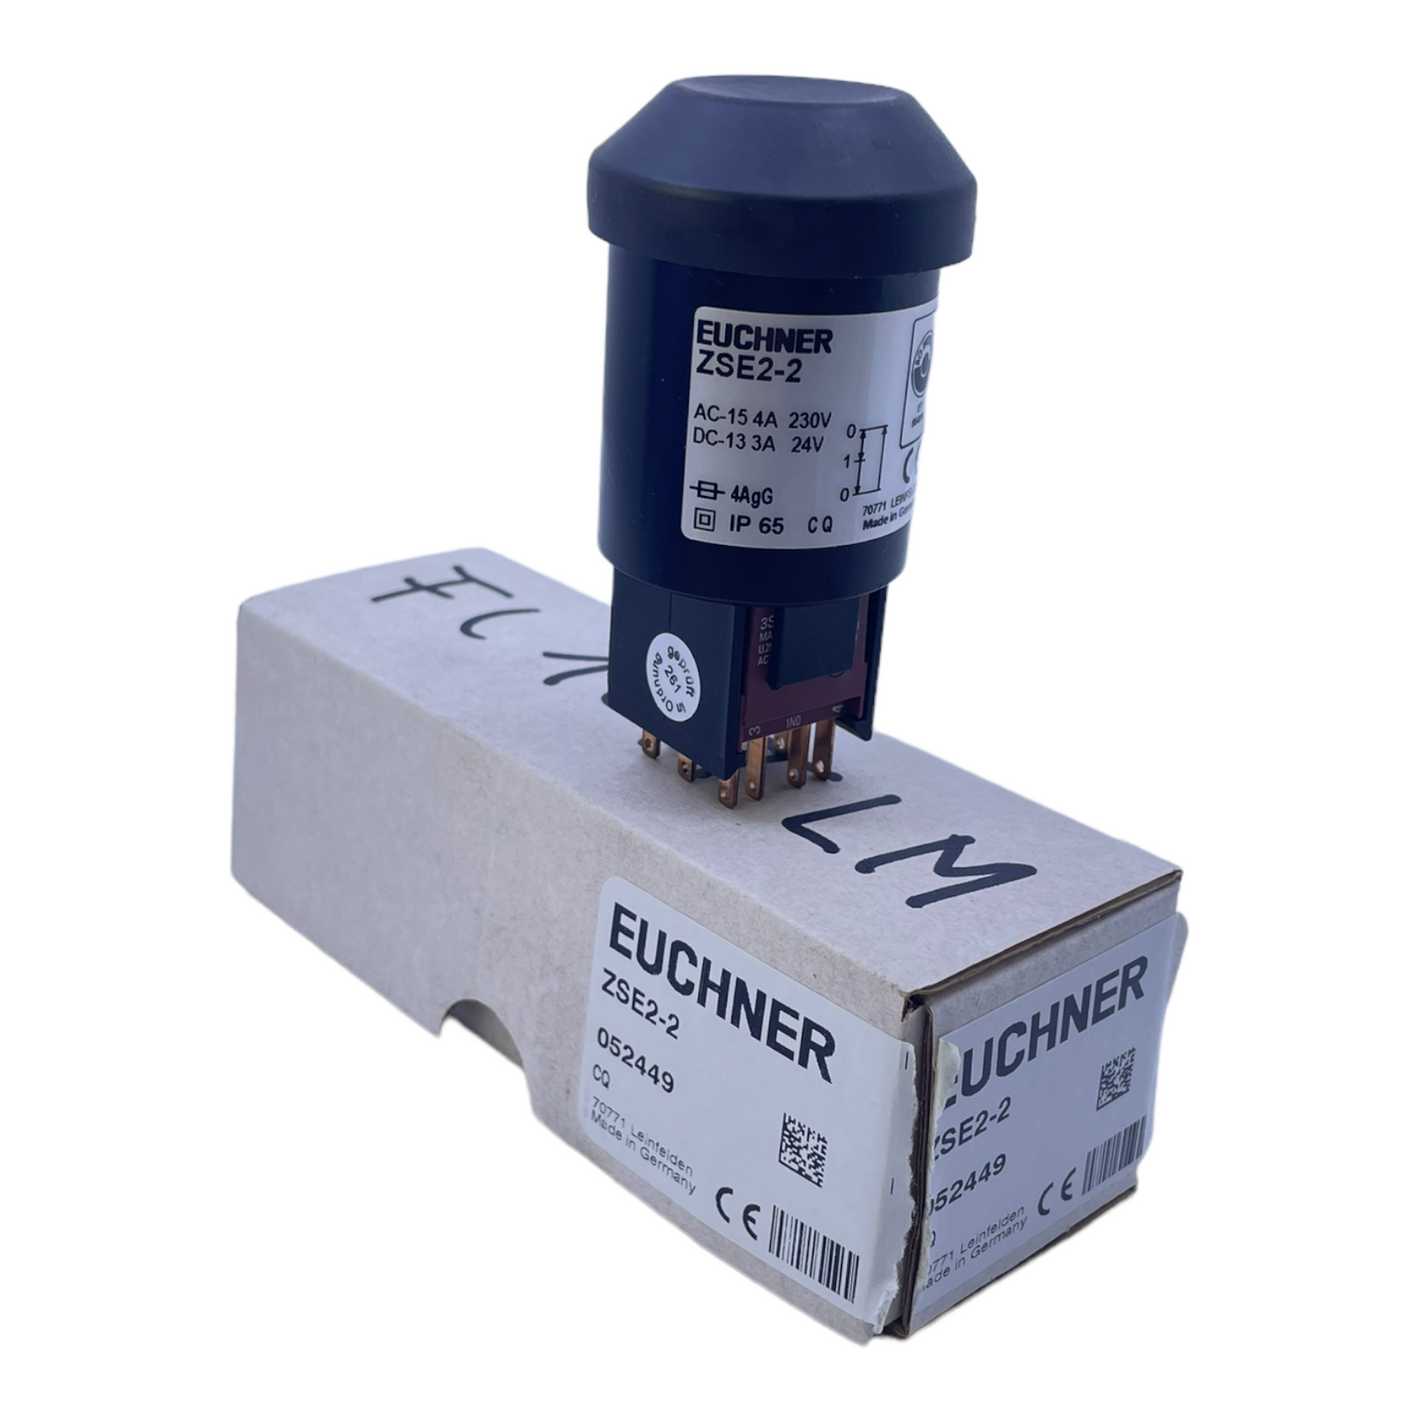 Euchner ZSE2-2 enabling switch 052449 for industrial use 230V AC 4A